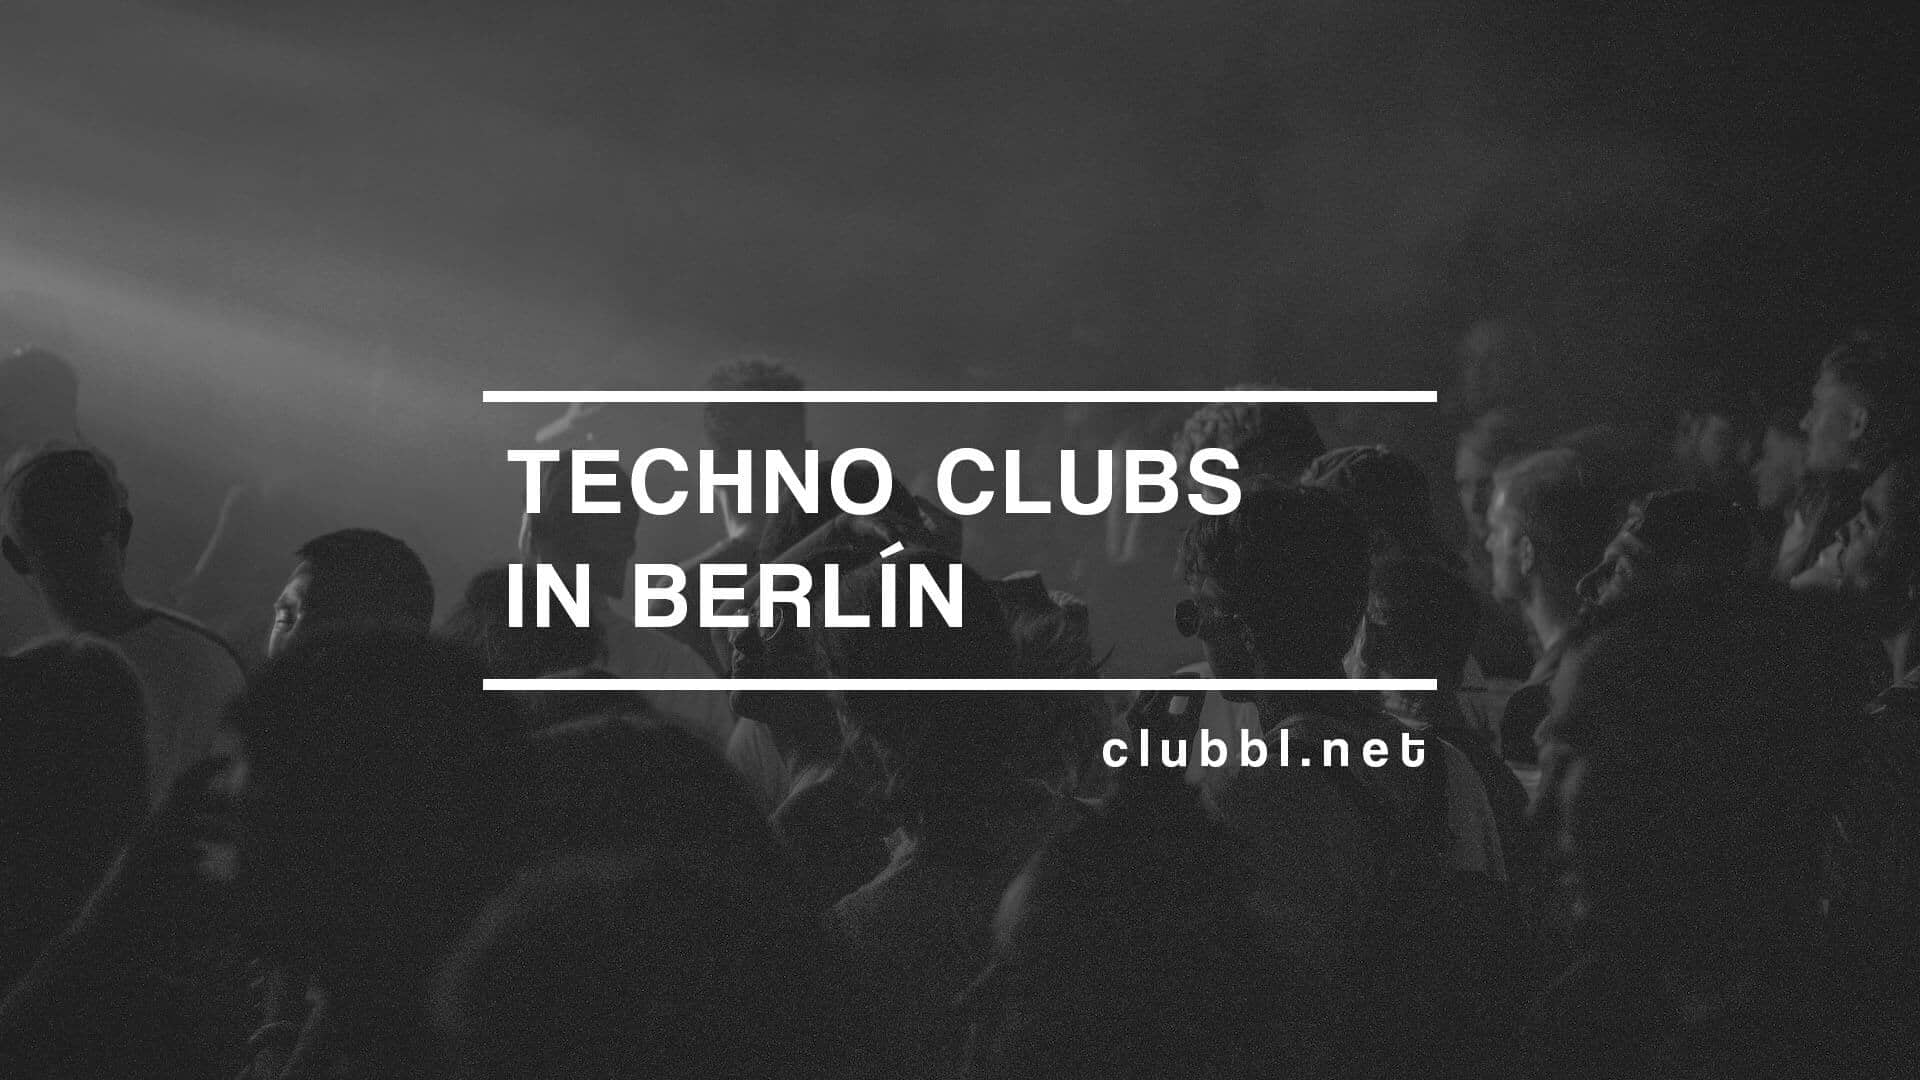 Techno clubs in Berlín that you can´t lose in the city, discover the list of the clubs